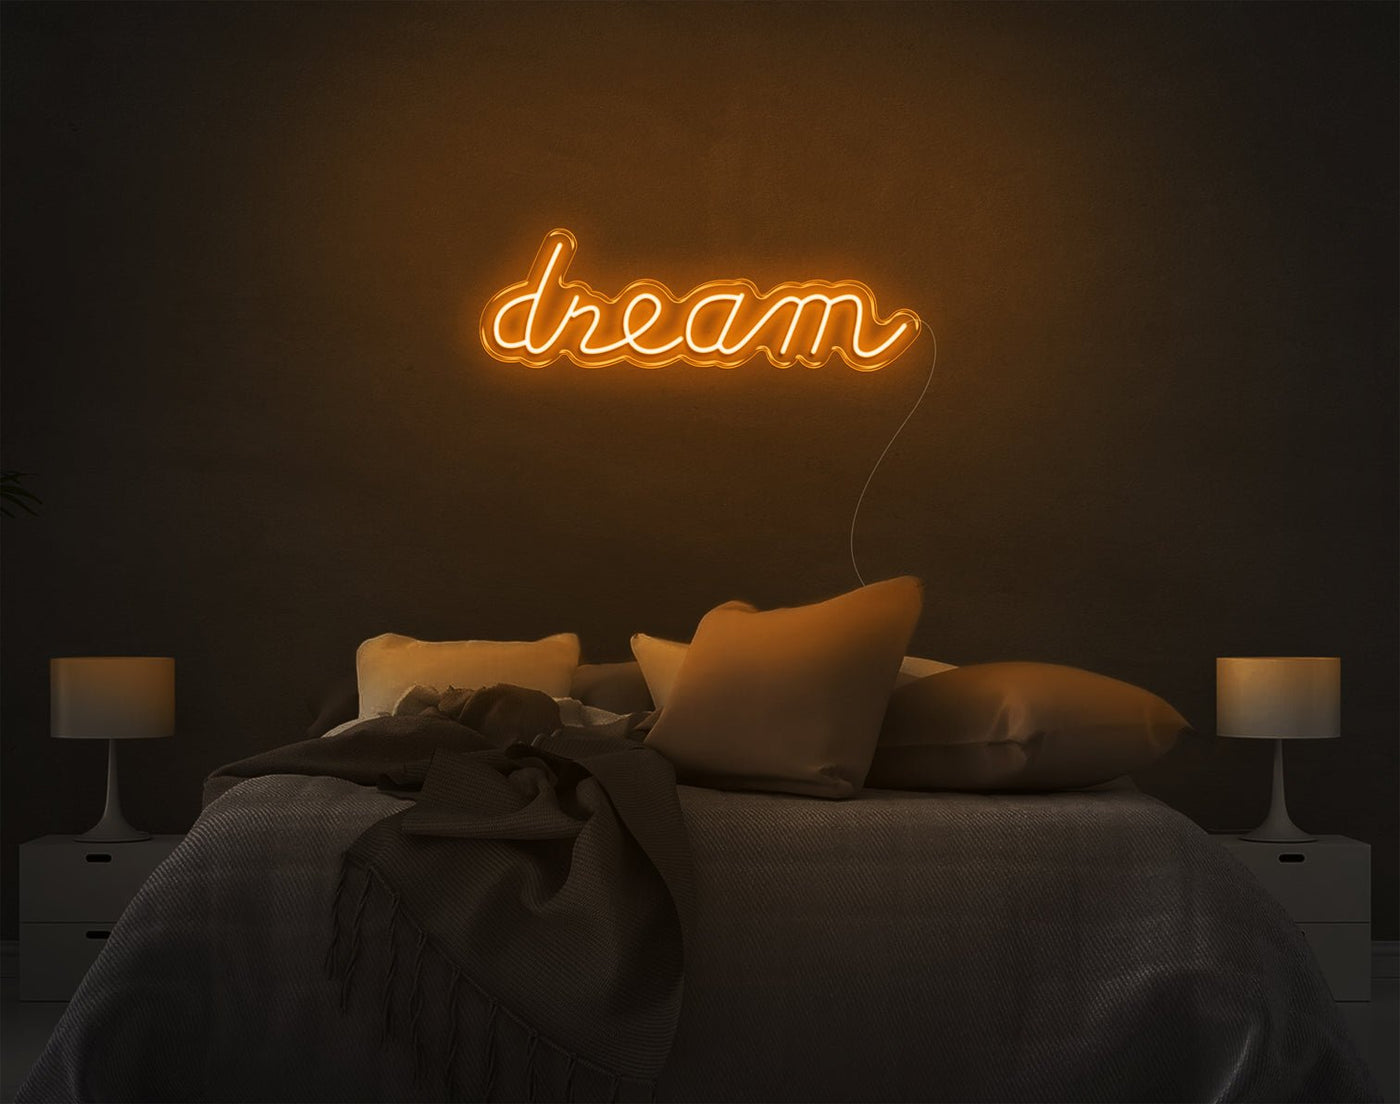 Dream LED Neon Sign - 8inch x 26inchHot Pink